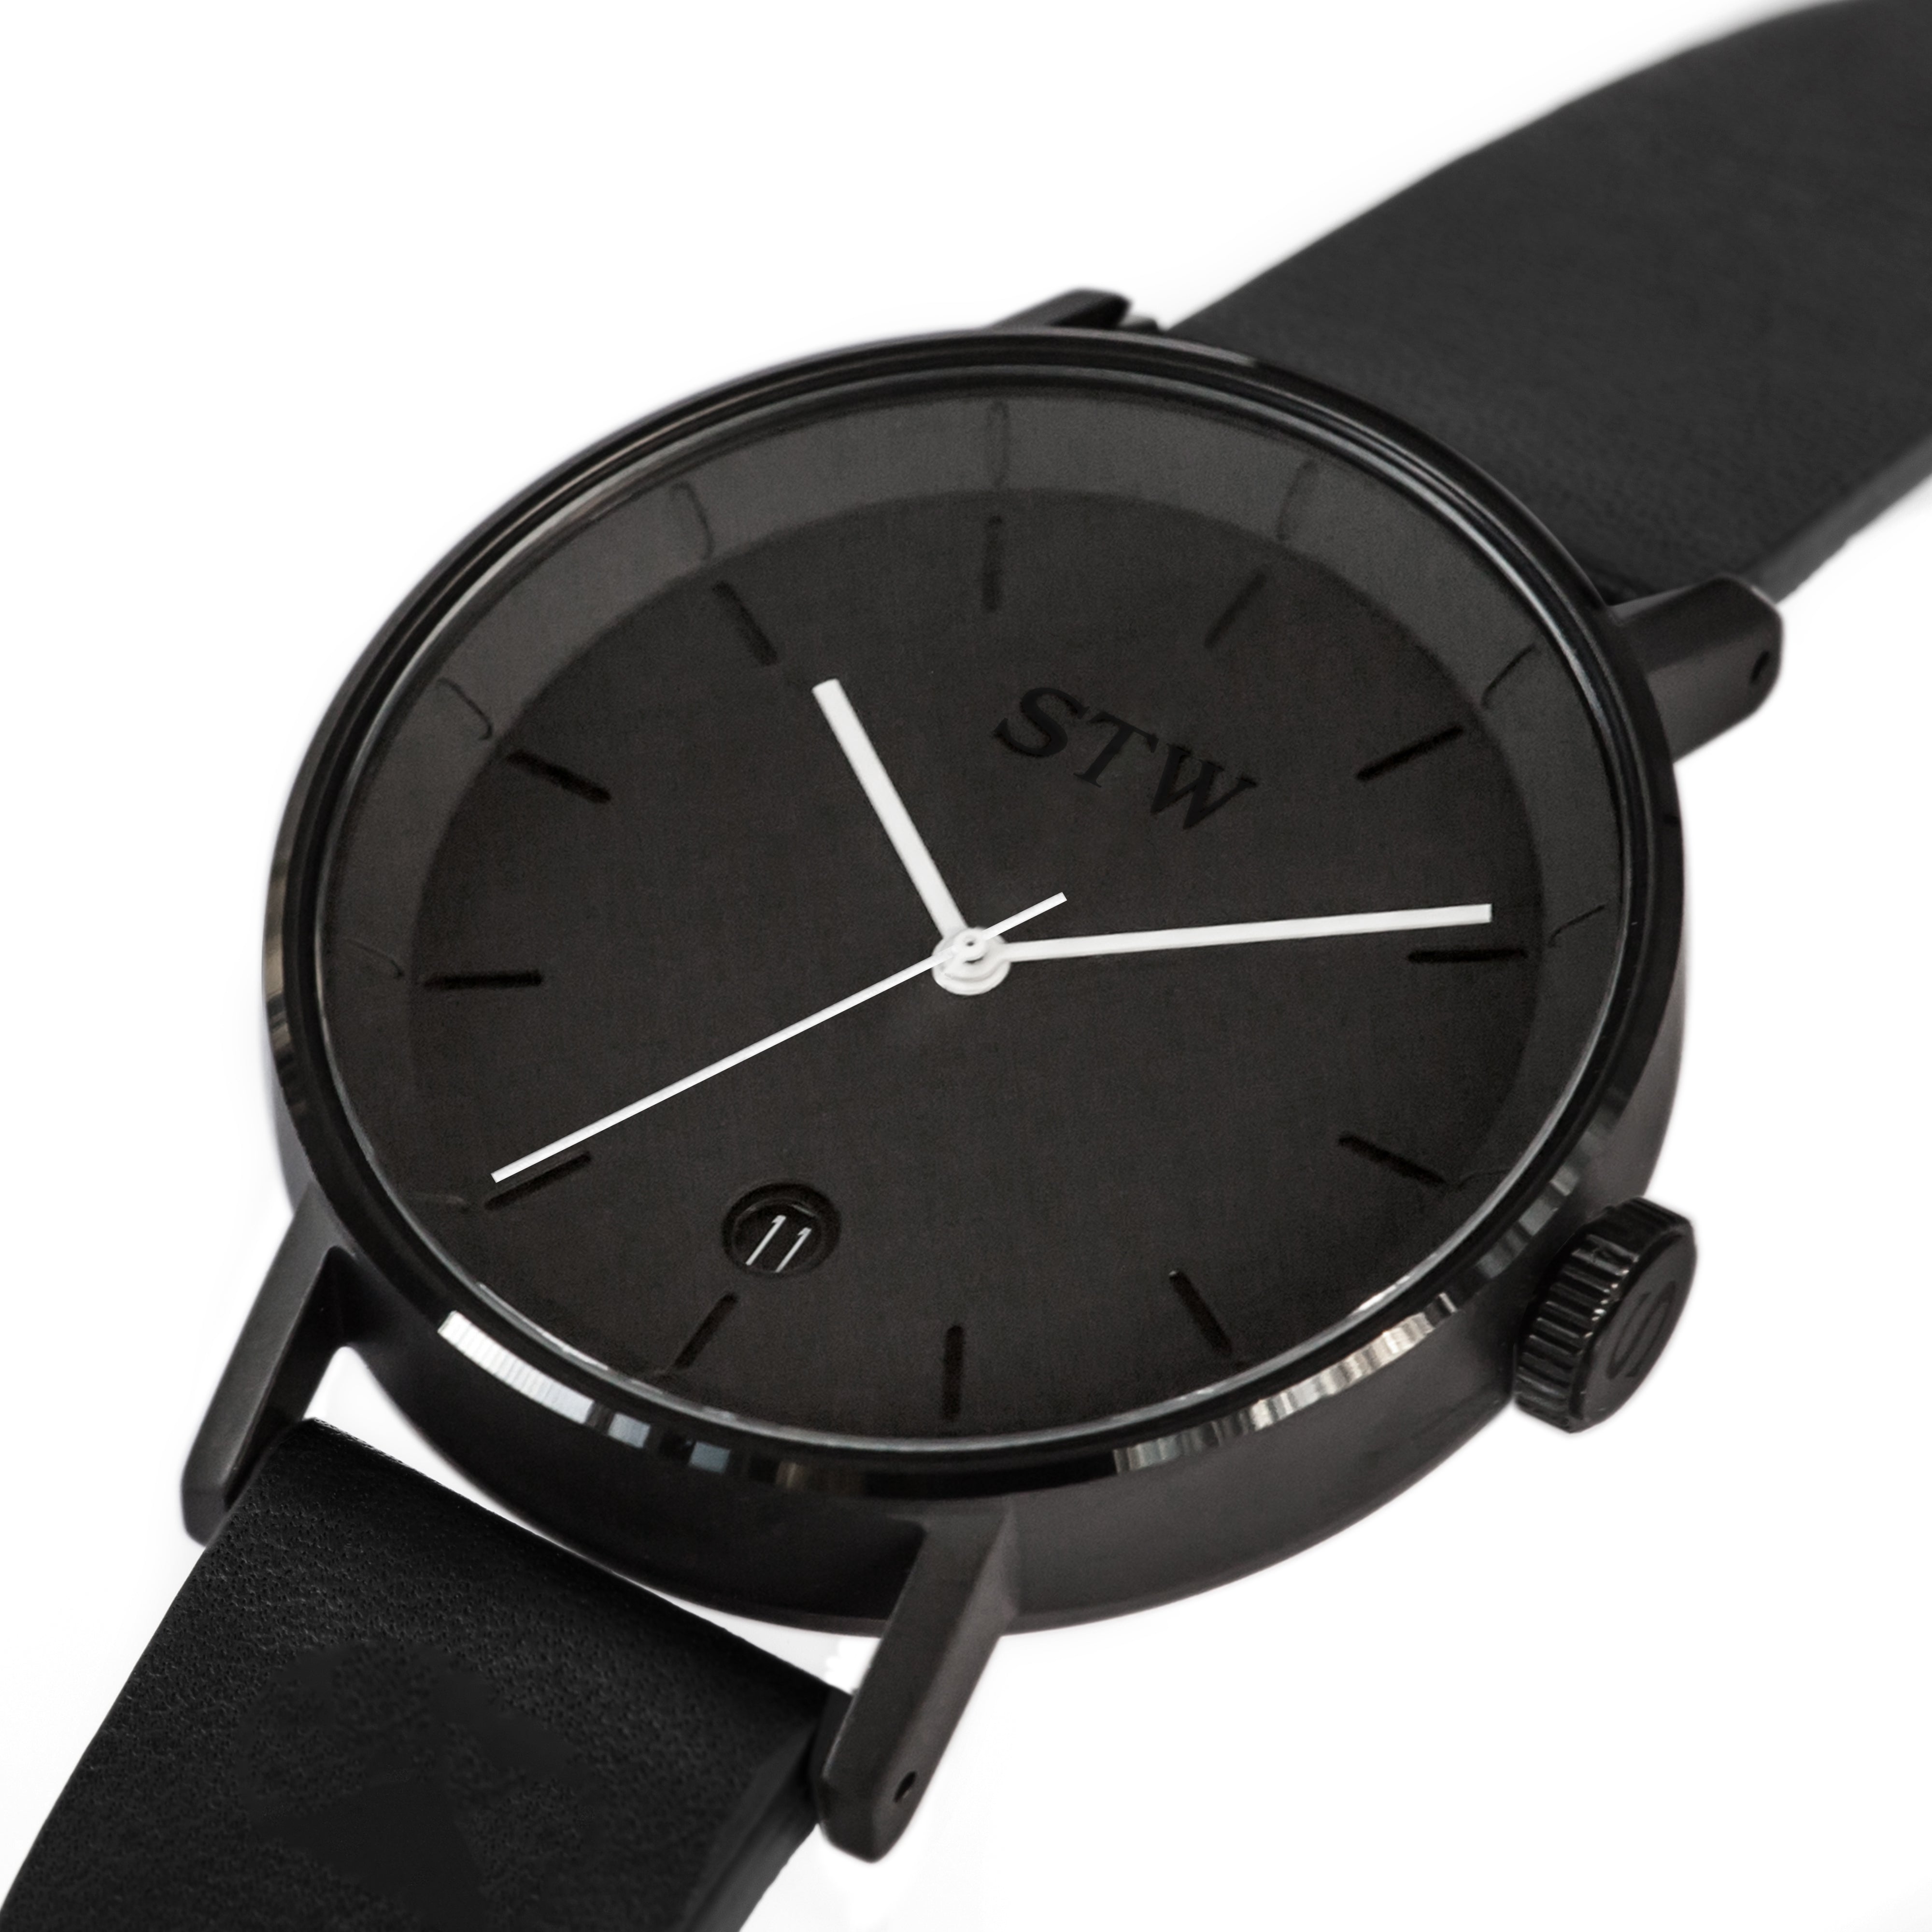 CUT OUT -  BLACK DIAL / BLACK LEATHER STRAP WATCH